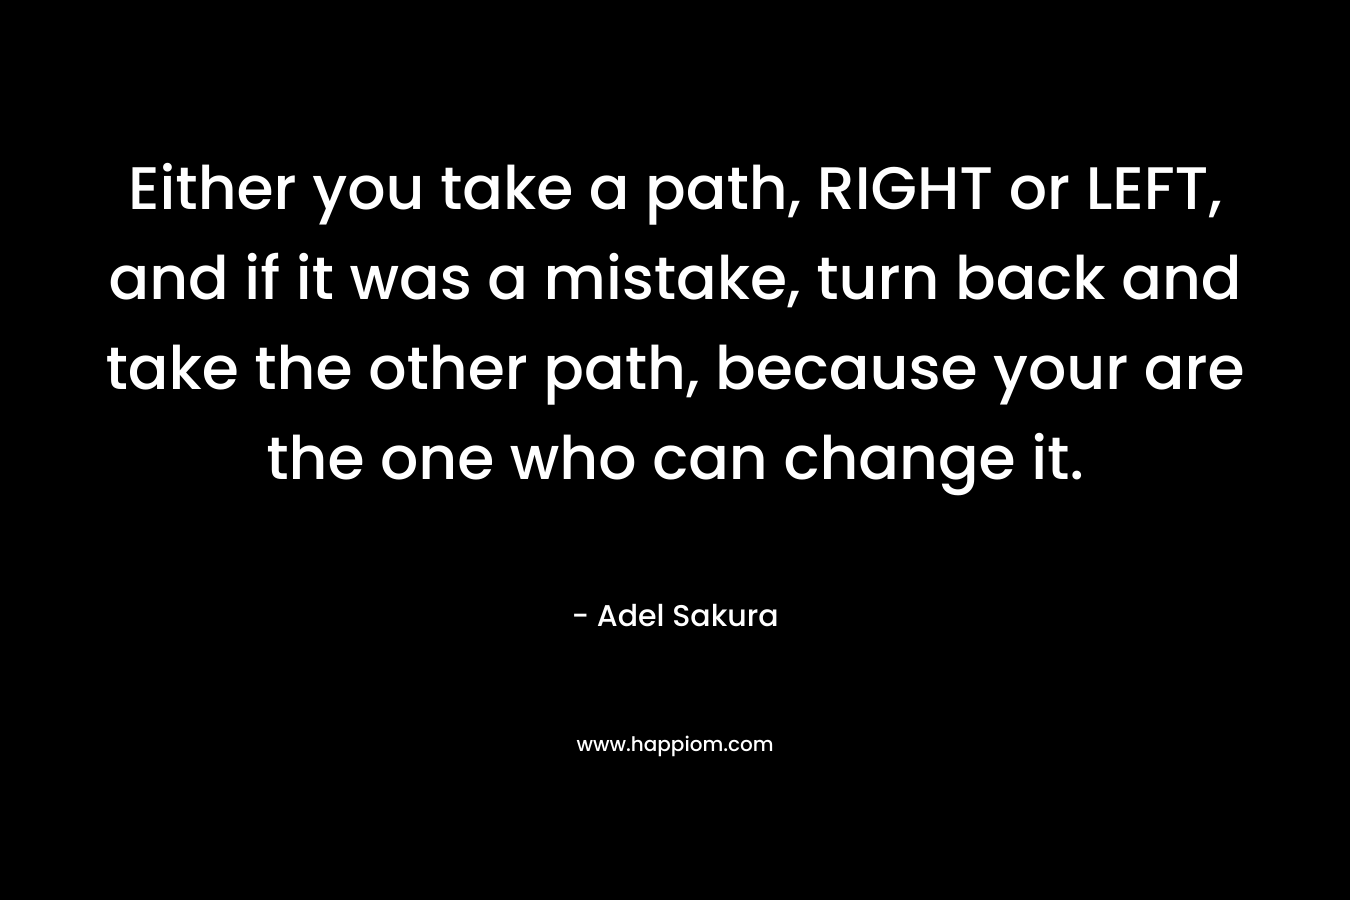 Either you take a path, RIGHT or LEFT, and if it was a mistake, turn back and take the other path, because your are the one who can change it.